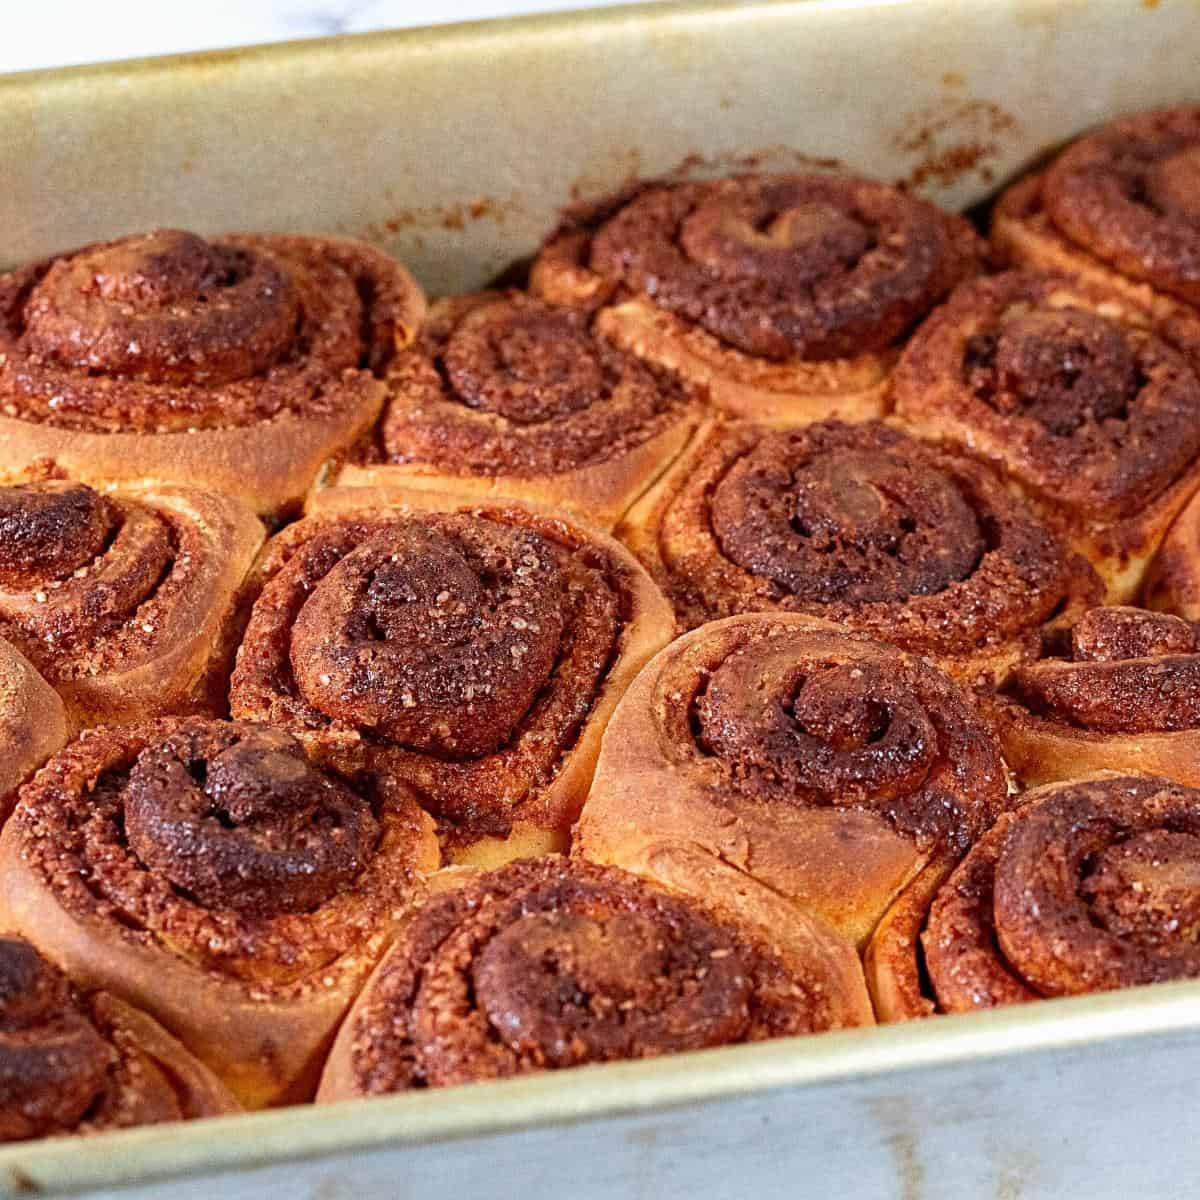 A baking dish with rolls and cream cheese.